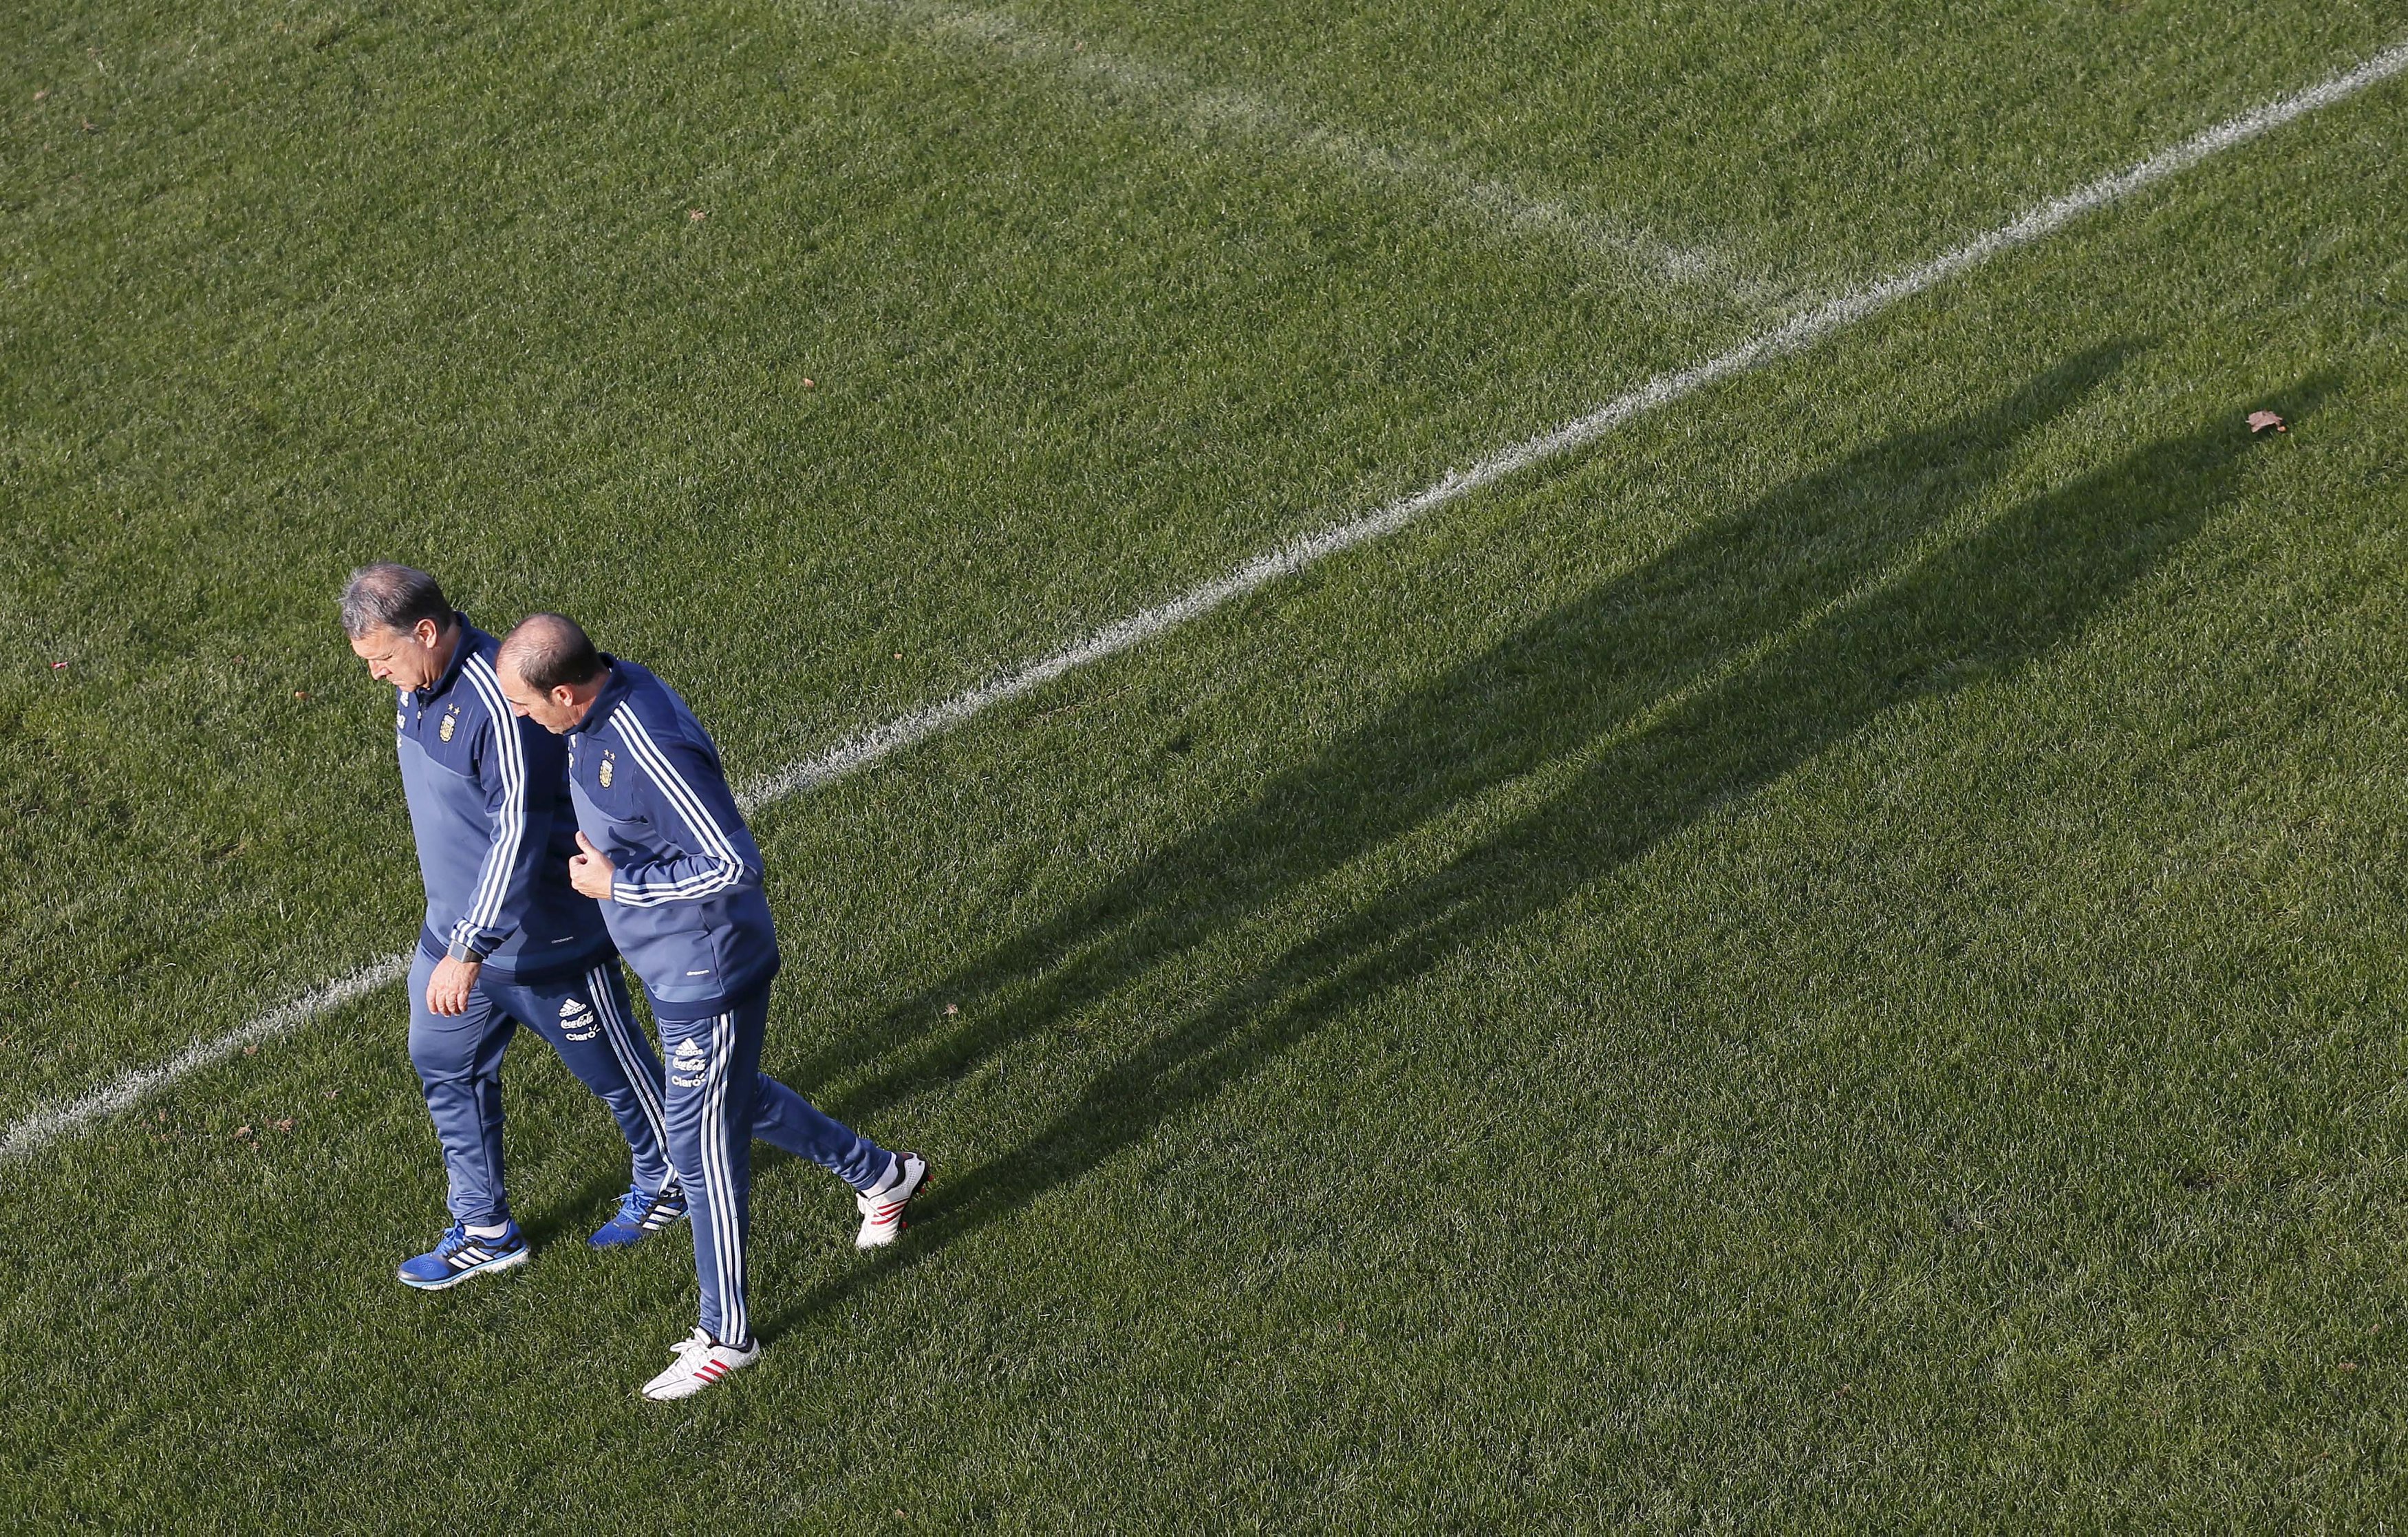 Argentina's national team coach Gerardo Martino (L) walks with his assistant during a training session during the Copa America soccer tournament in Vina del Mar, Chile June 27, 2015. REUTERS/Rodrigo Garrido